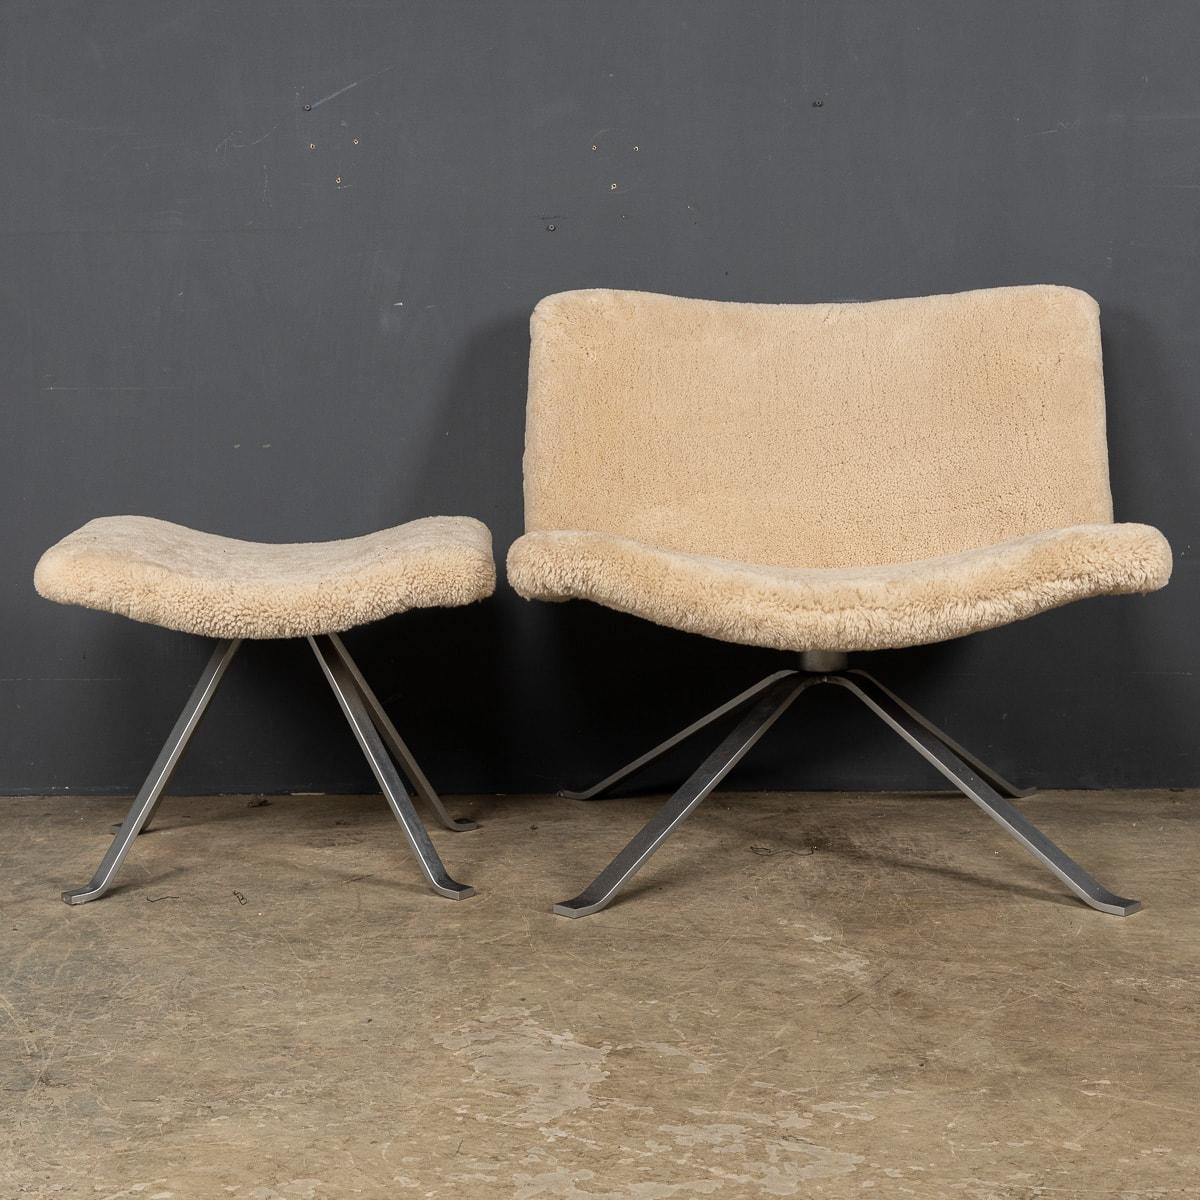 20th Century Italian Swivel Chairs with Matching Foot Stools, circa 1970 For Sale 2